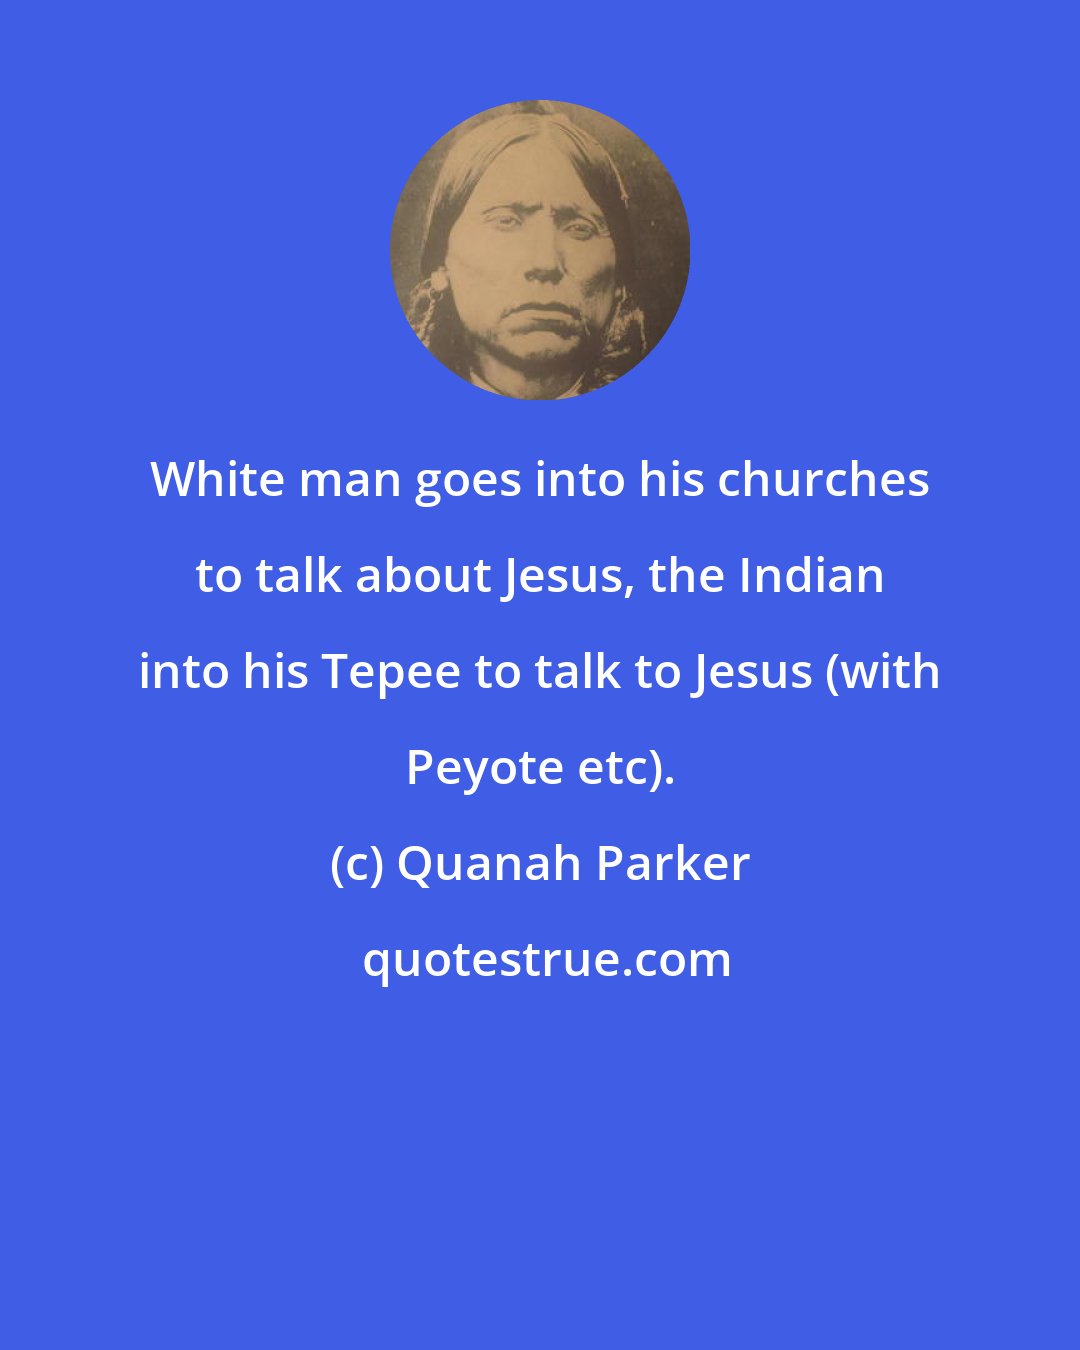 Quanah Parker: White man goes into his churches to talk about Jesus, the Indian into his Tepee to talk to Jesus (with Peyote etc).